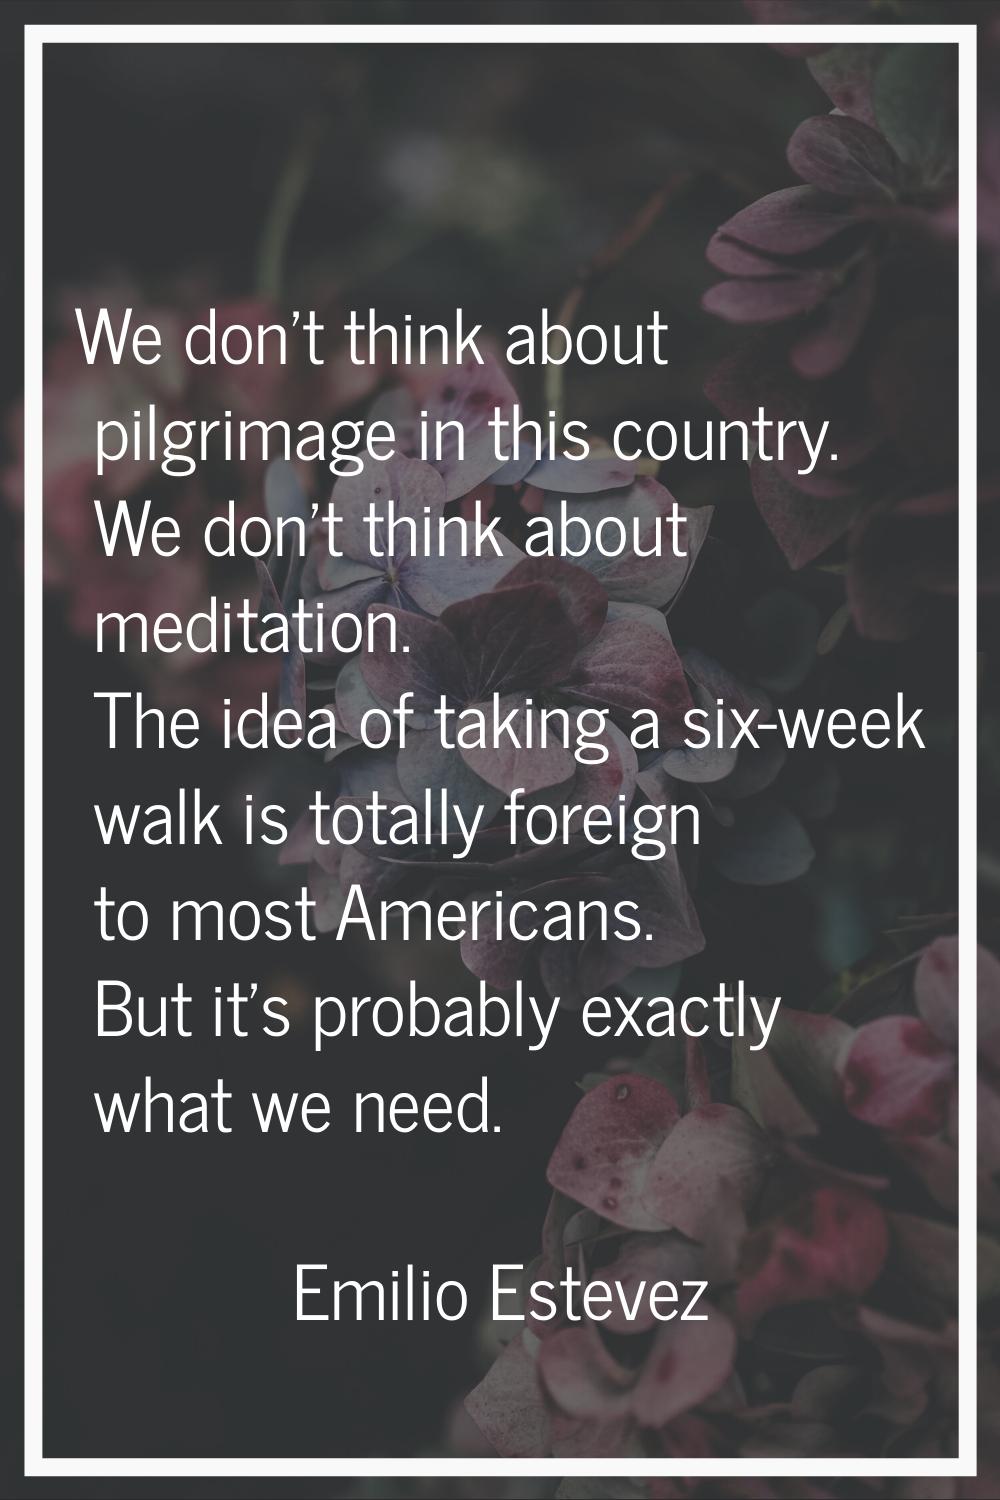 We don't think about pilgrimage in this country. We don't think about meditation. The idea of takin